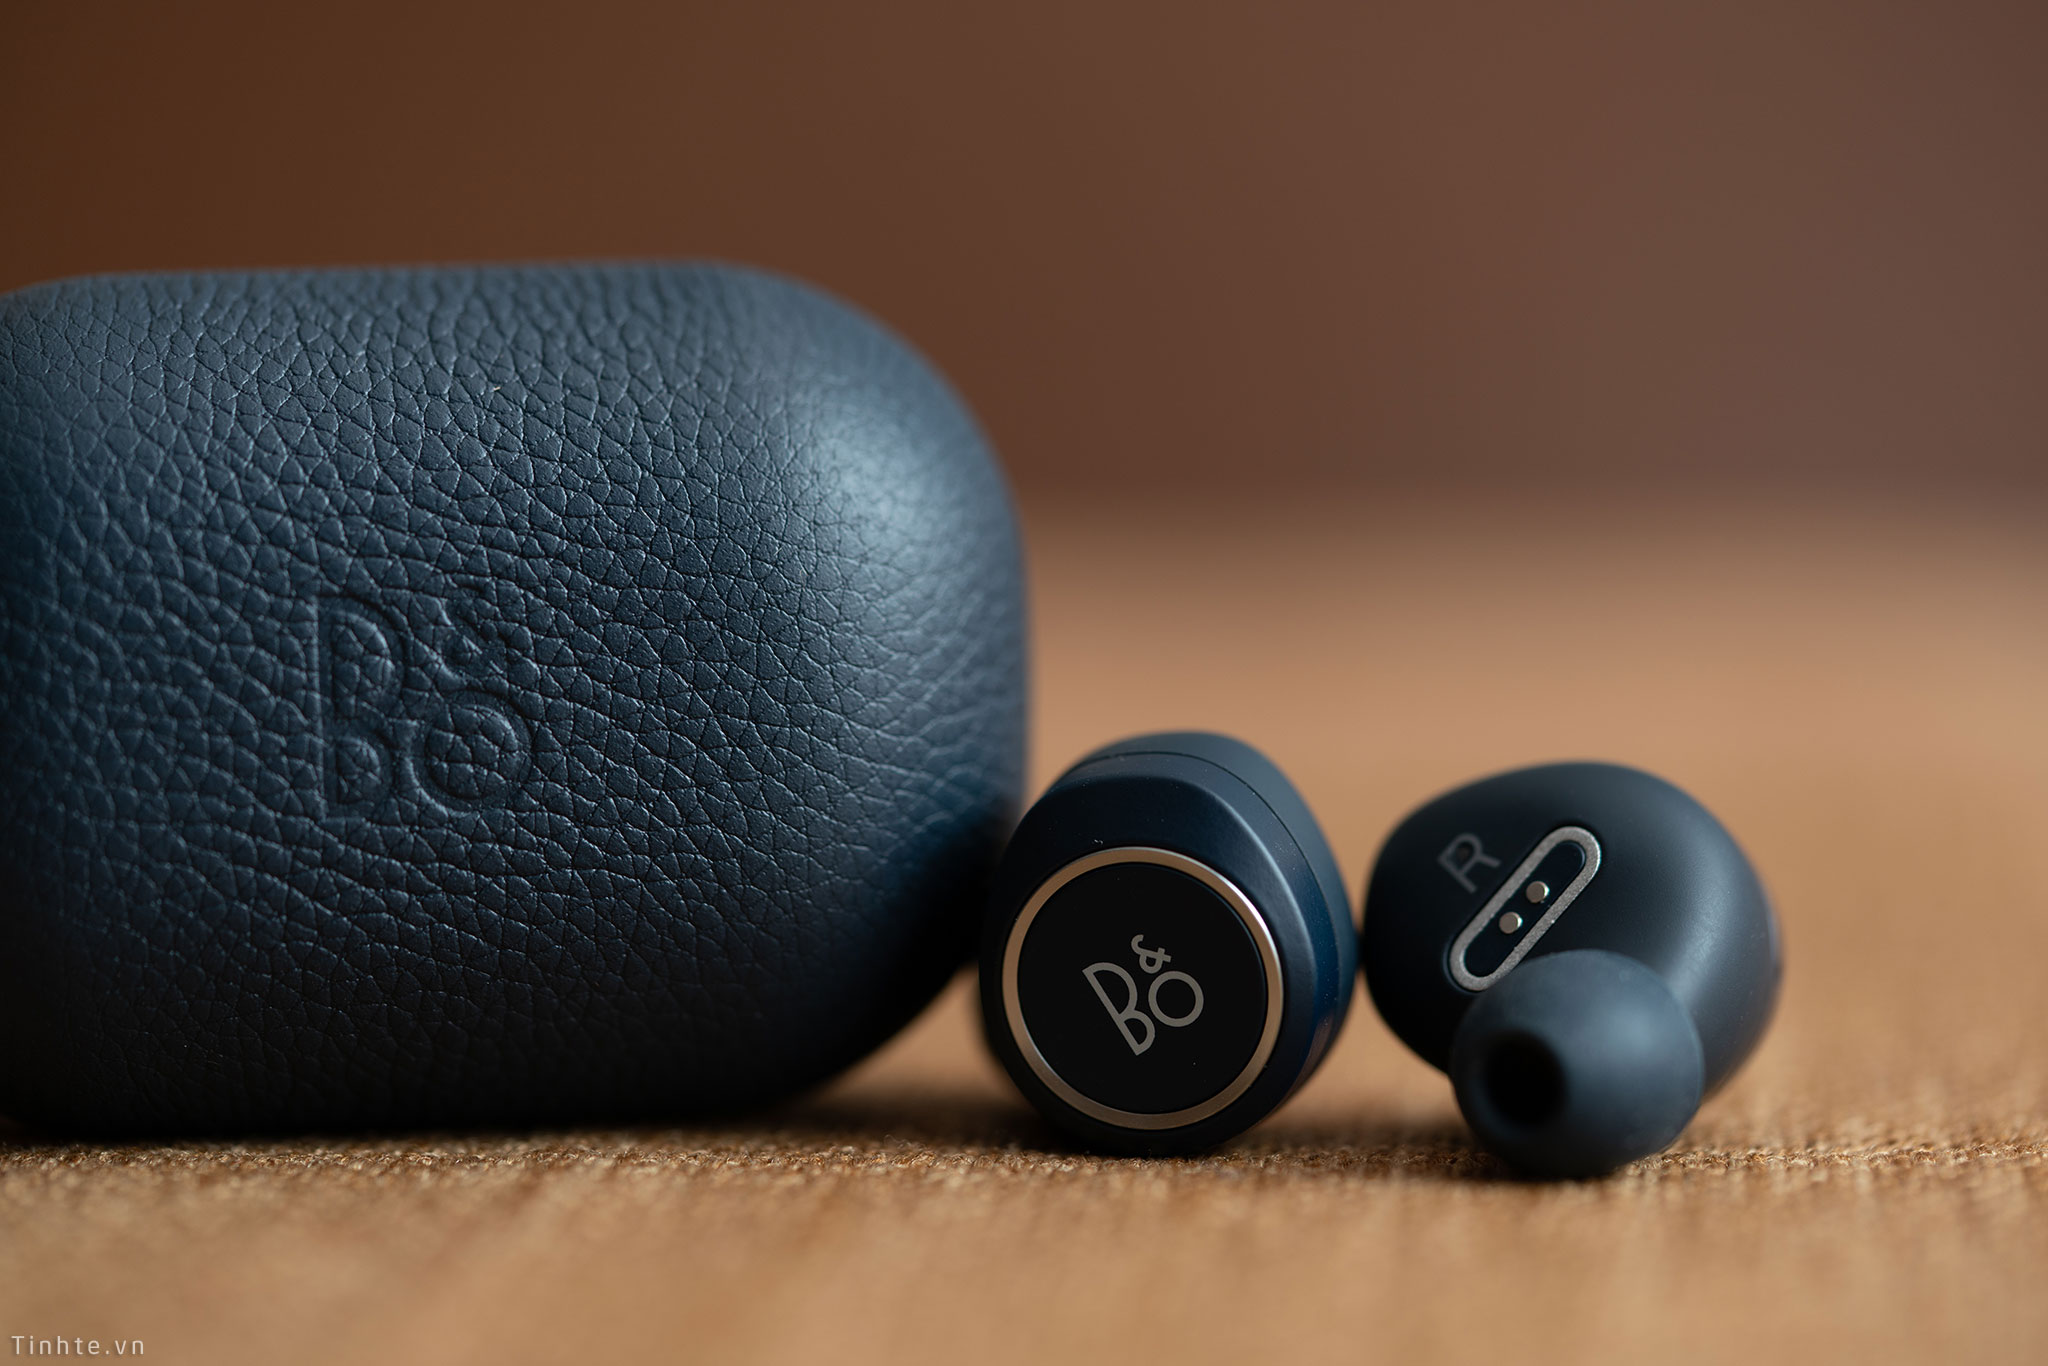 tinhte_beoplay_e8_2_review (2).jpg